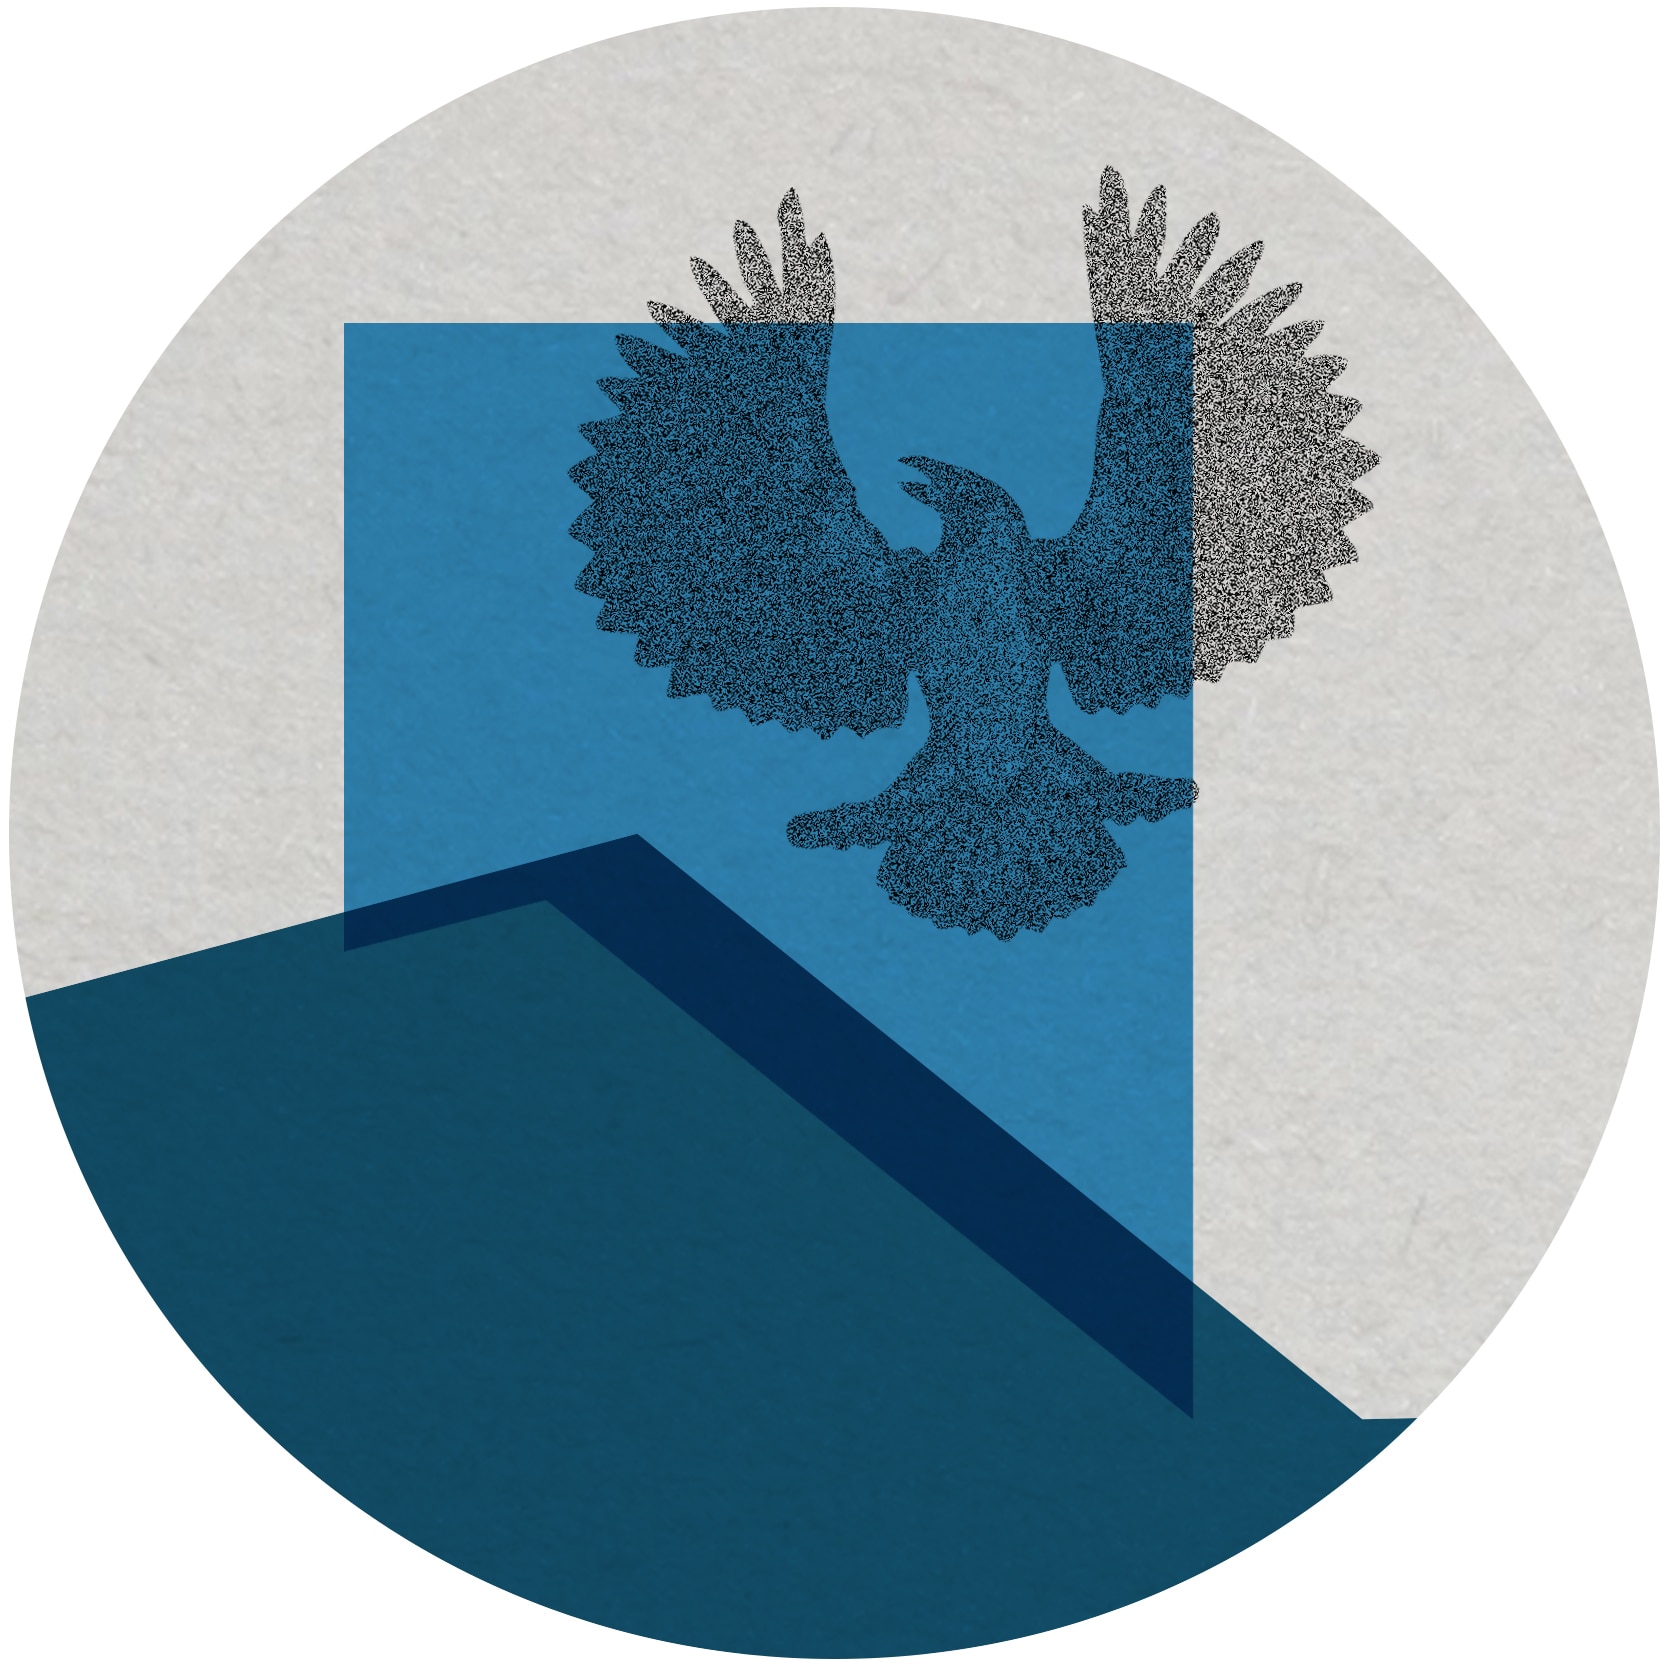 an outline of the state of South Australia in blue, a piping shrike bird with wings spread is outlined in grey